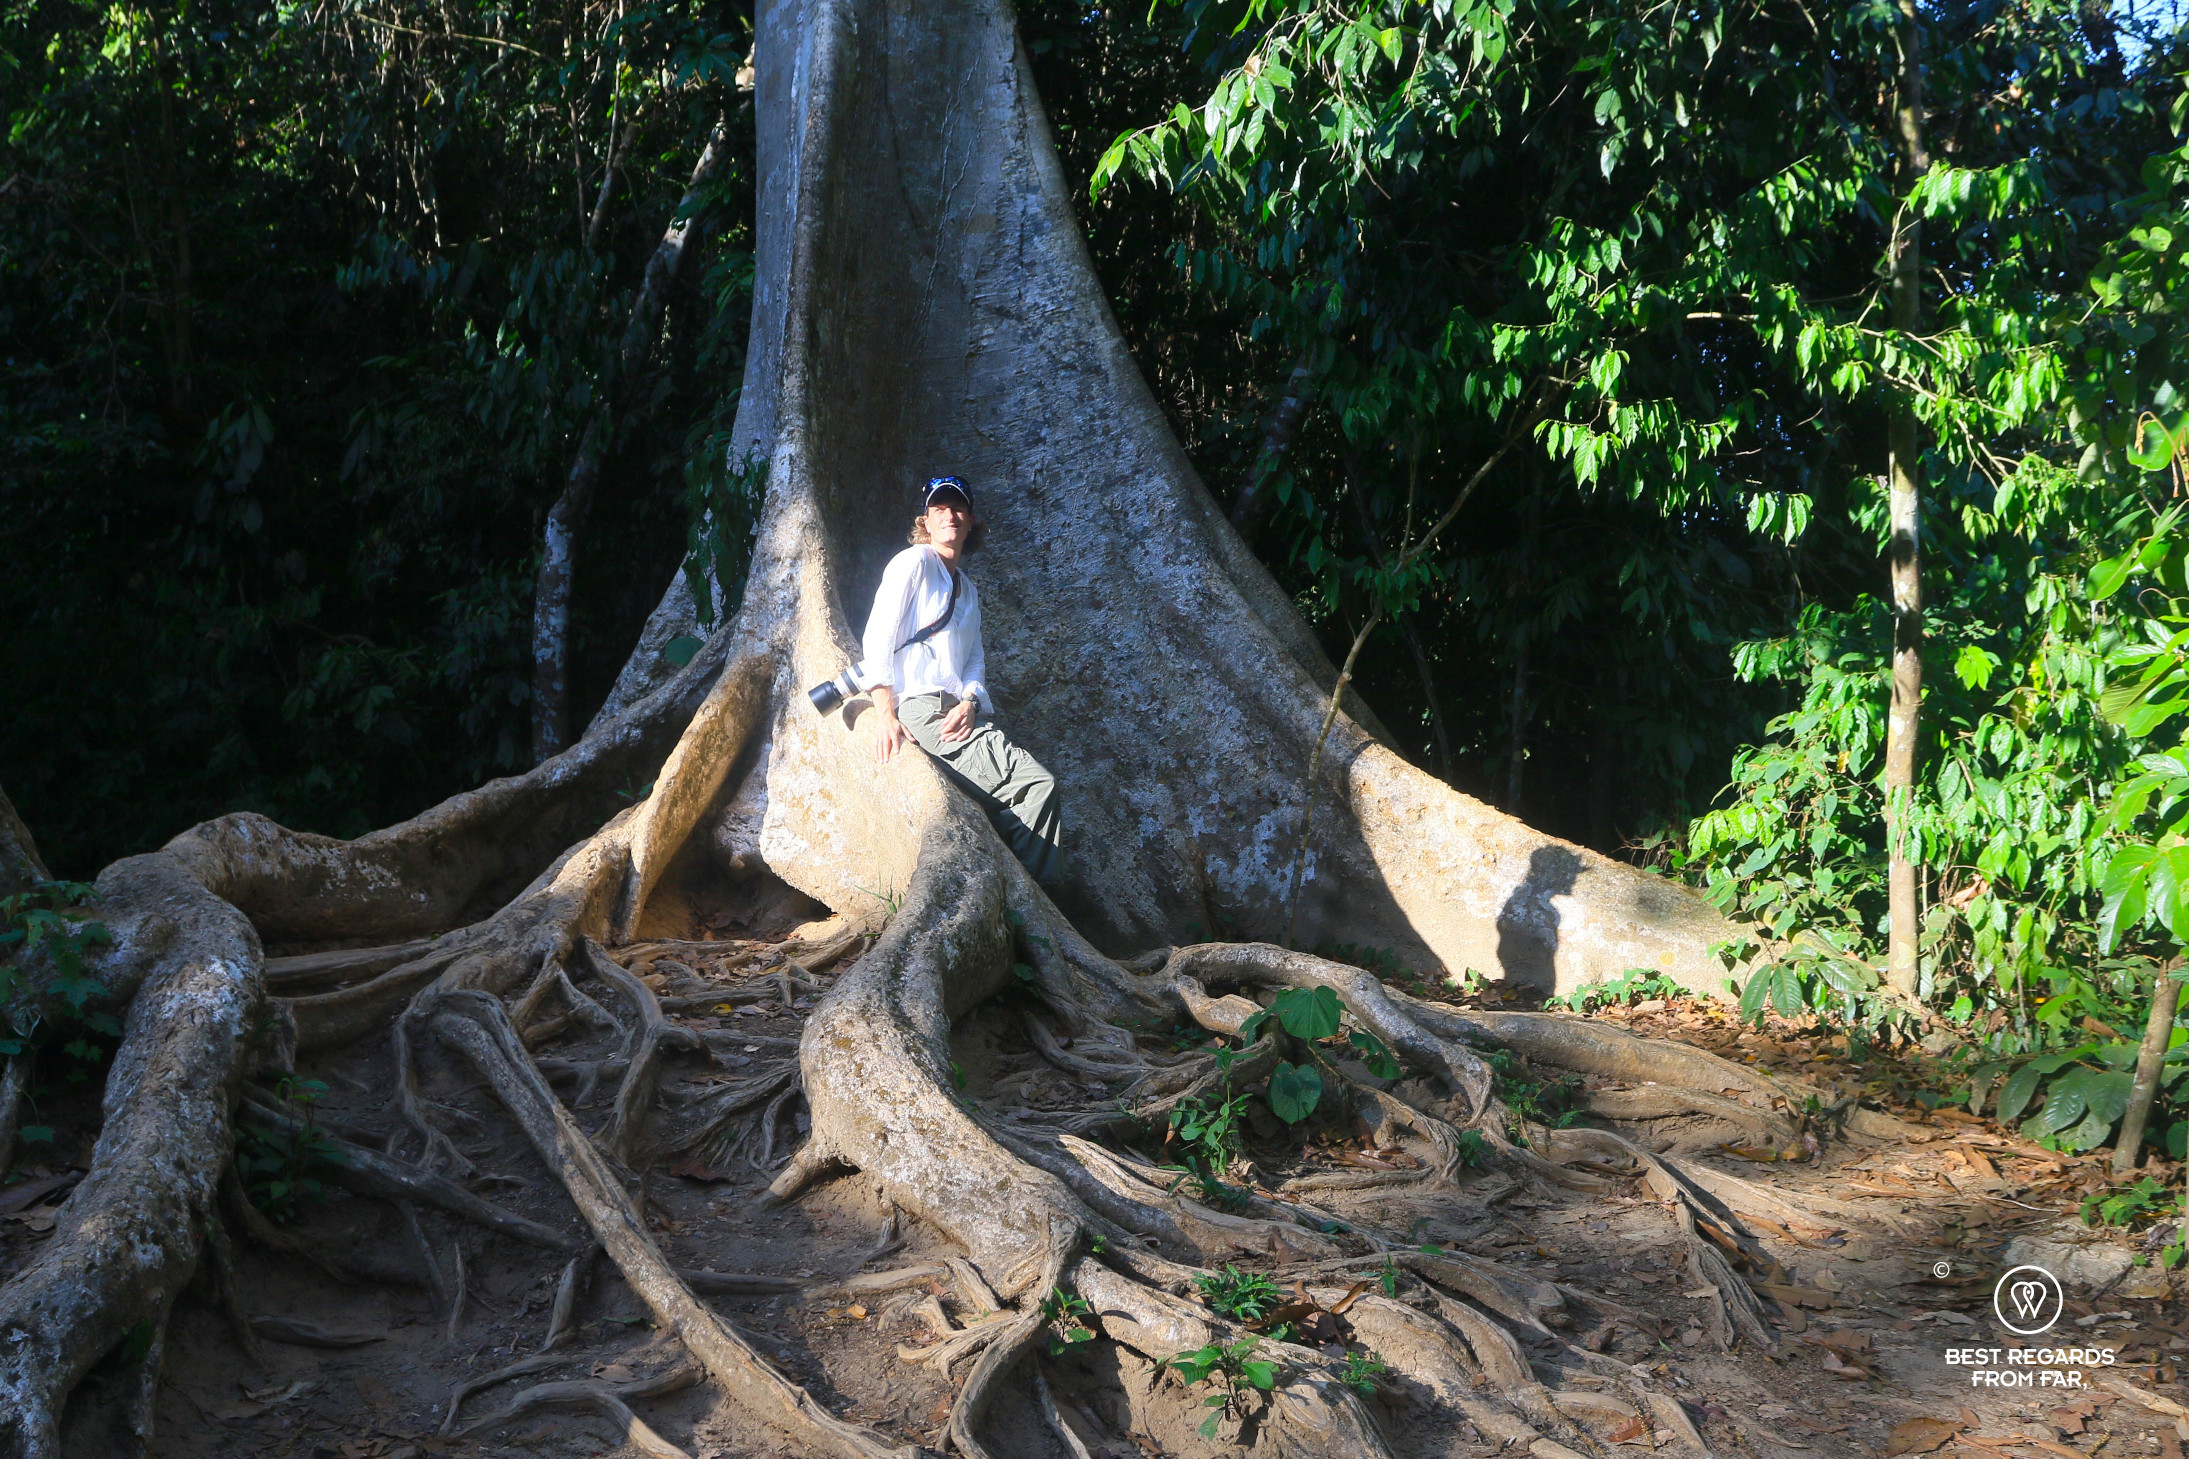 Photographer Marcella van Alphen posing on a large tree root in the rainforest of Malaysia.